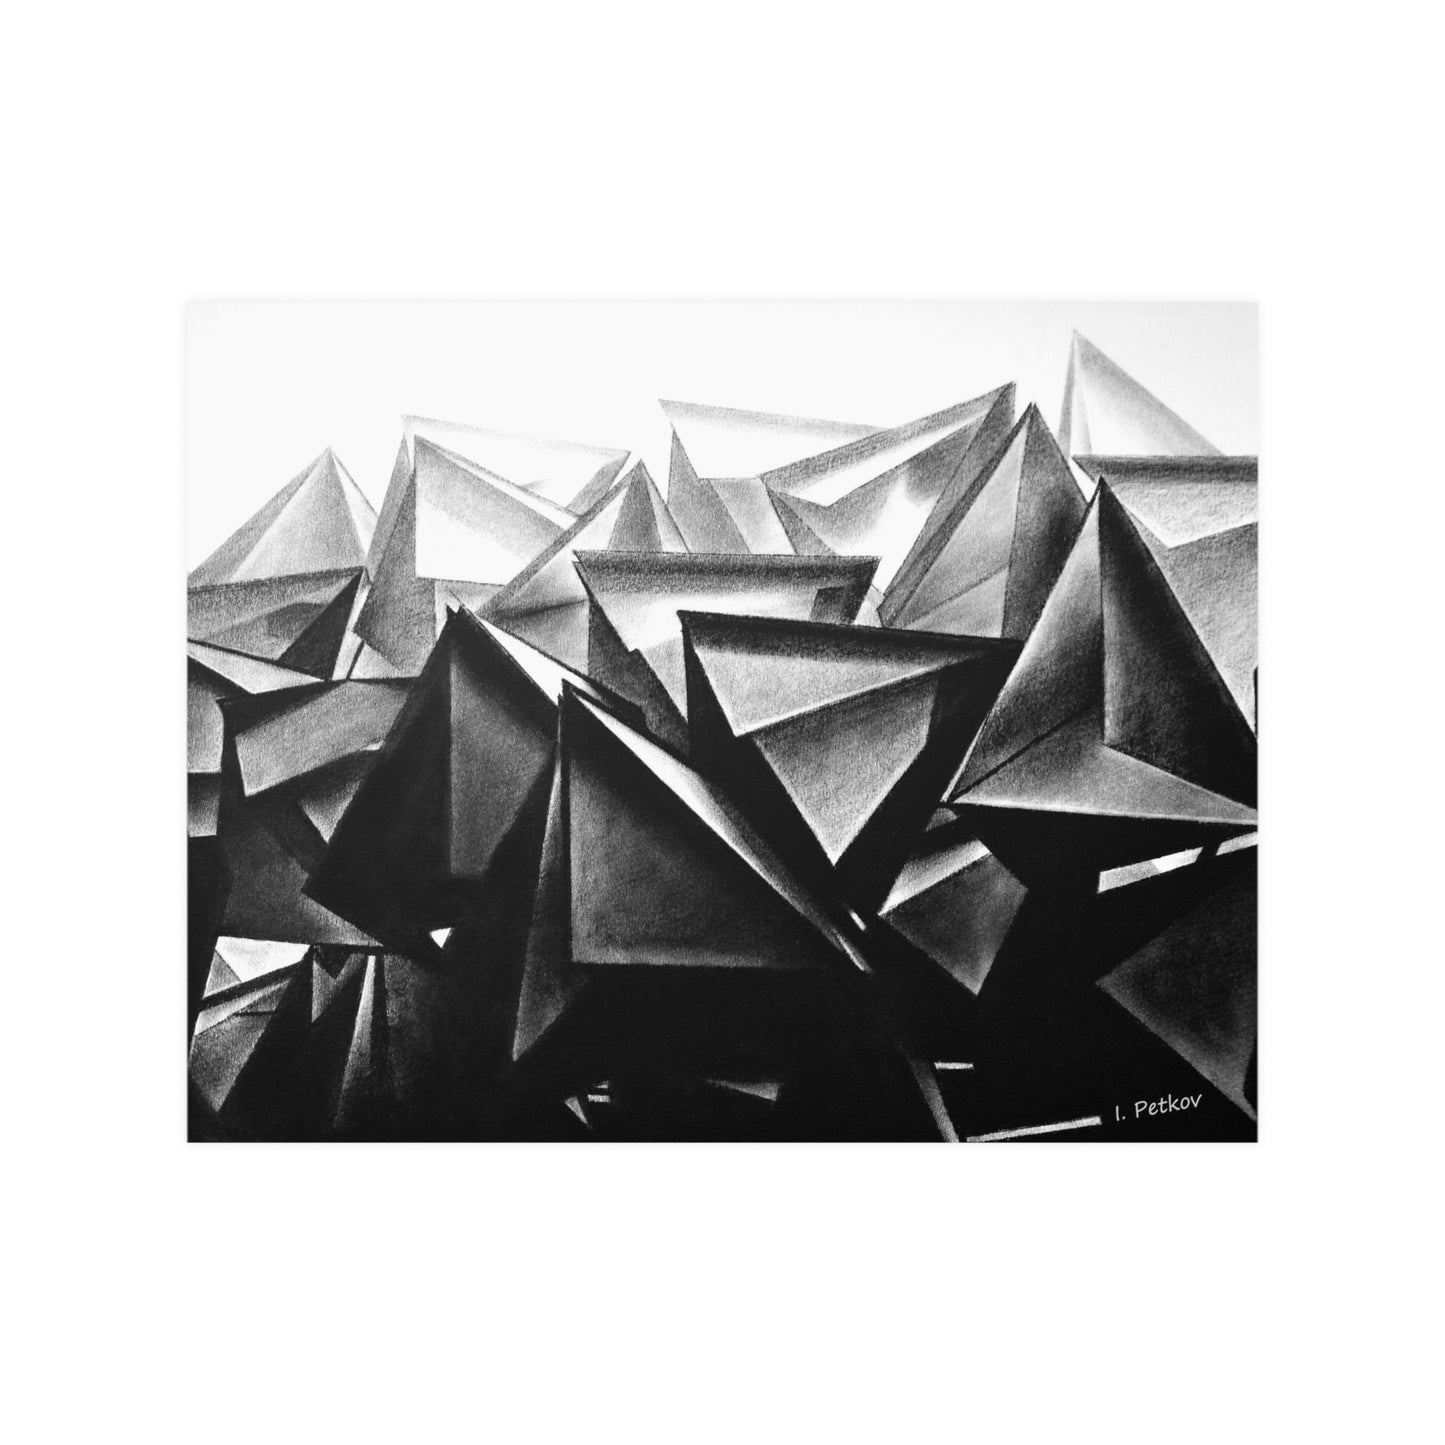 A Structure Rises - Unframed Satin Poster Print